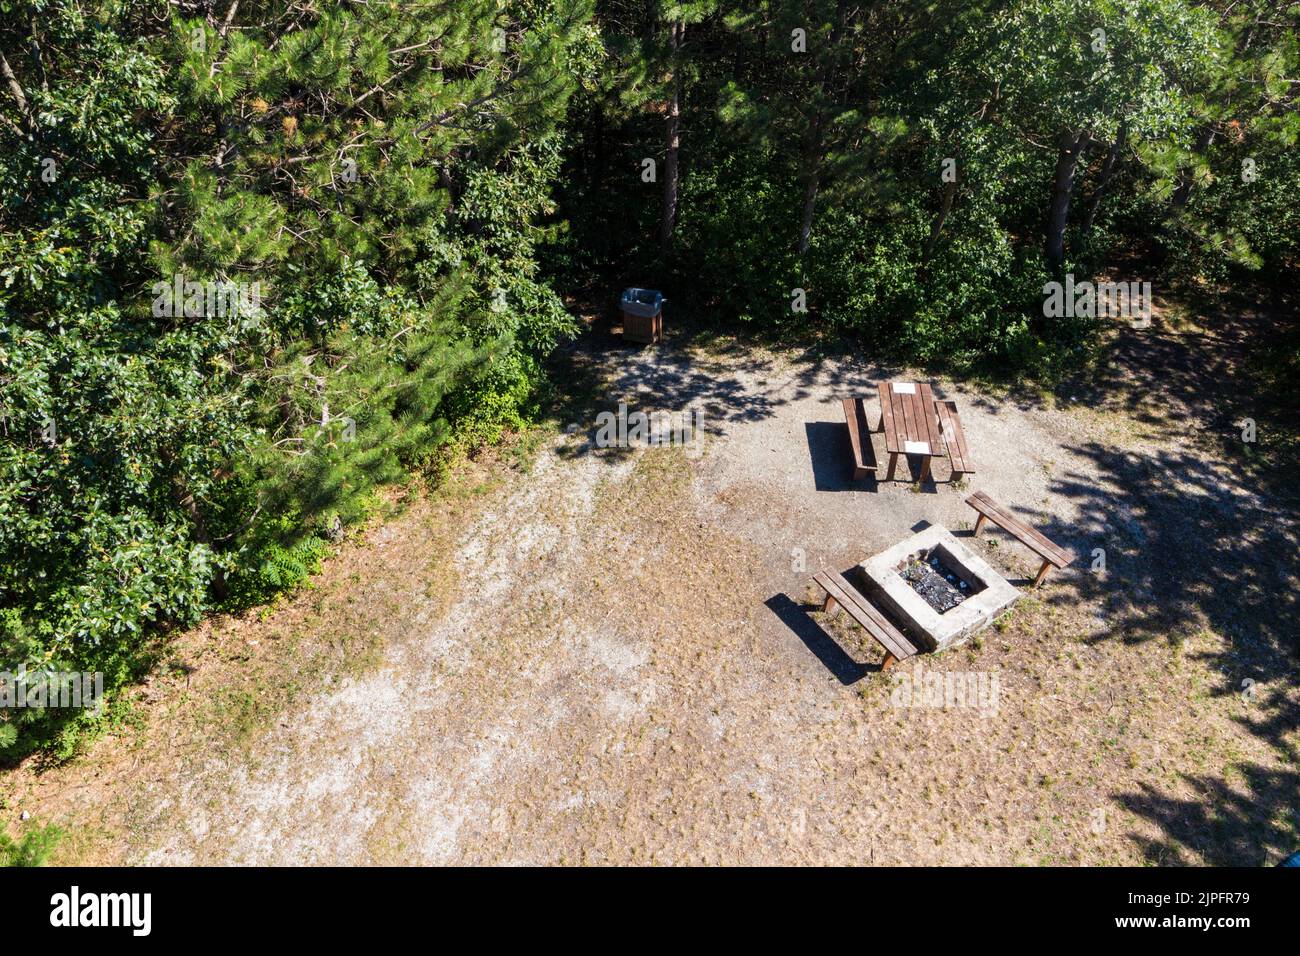 Top view of campfire place and wooden benches with table, resting place in forest, Becsi-domb, Sopron, Hungary Stock Photo